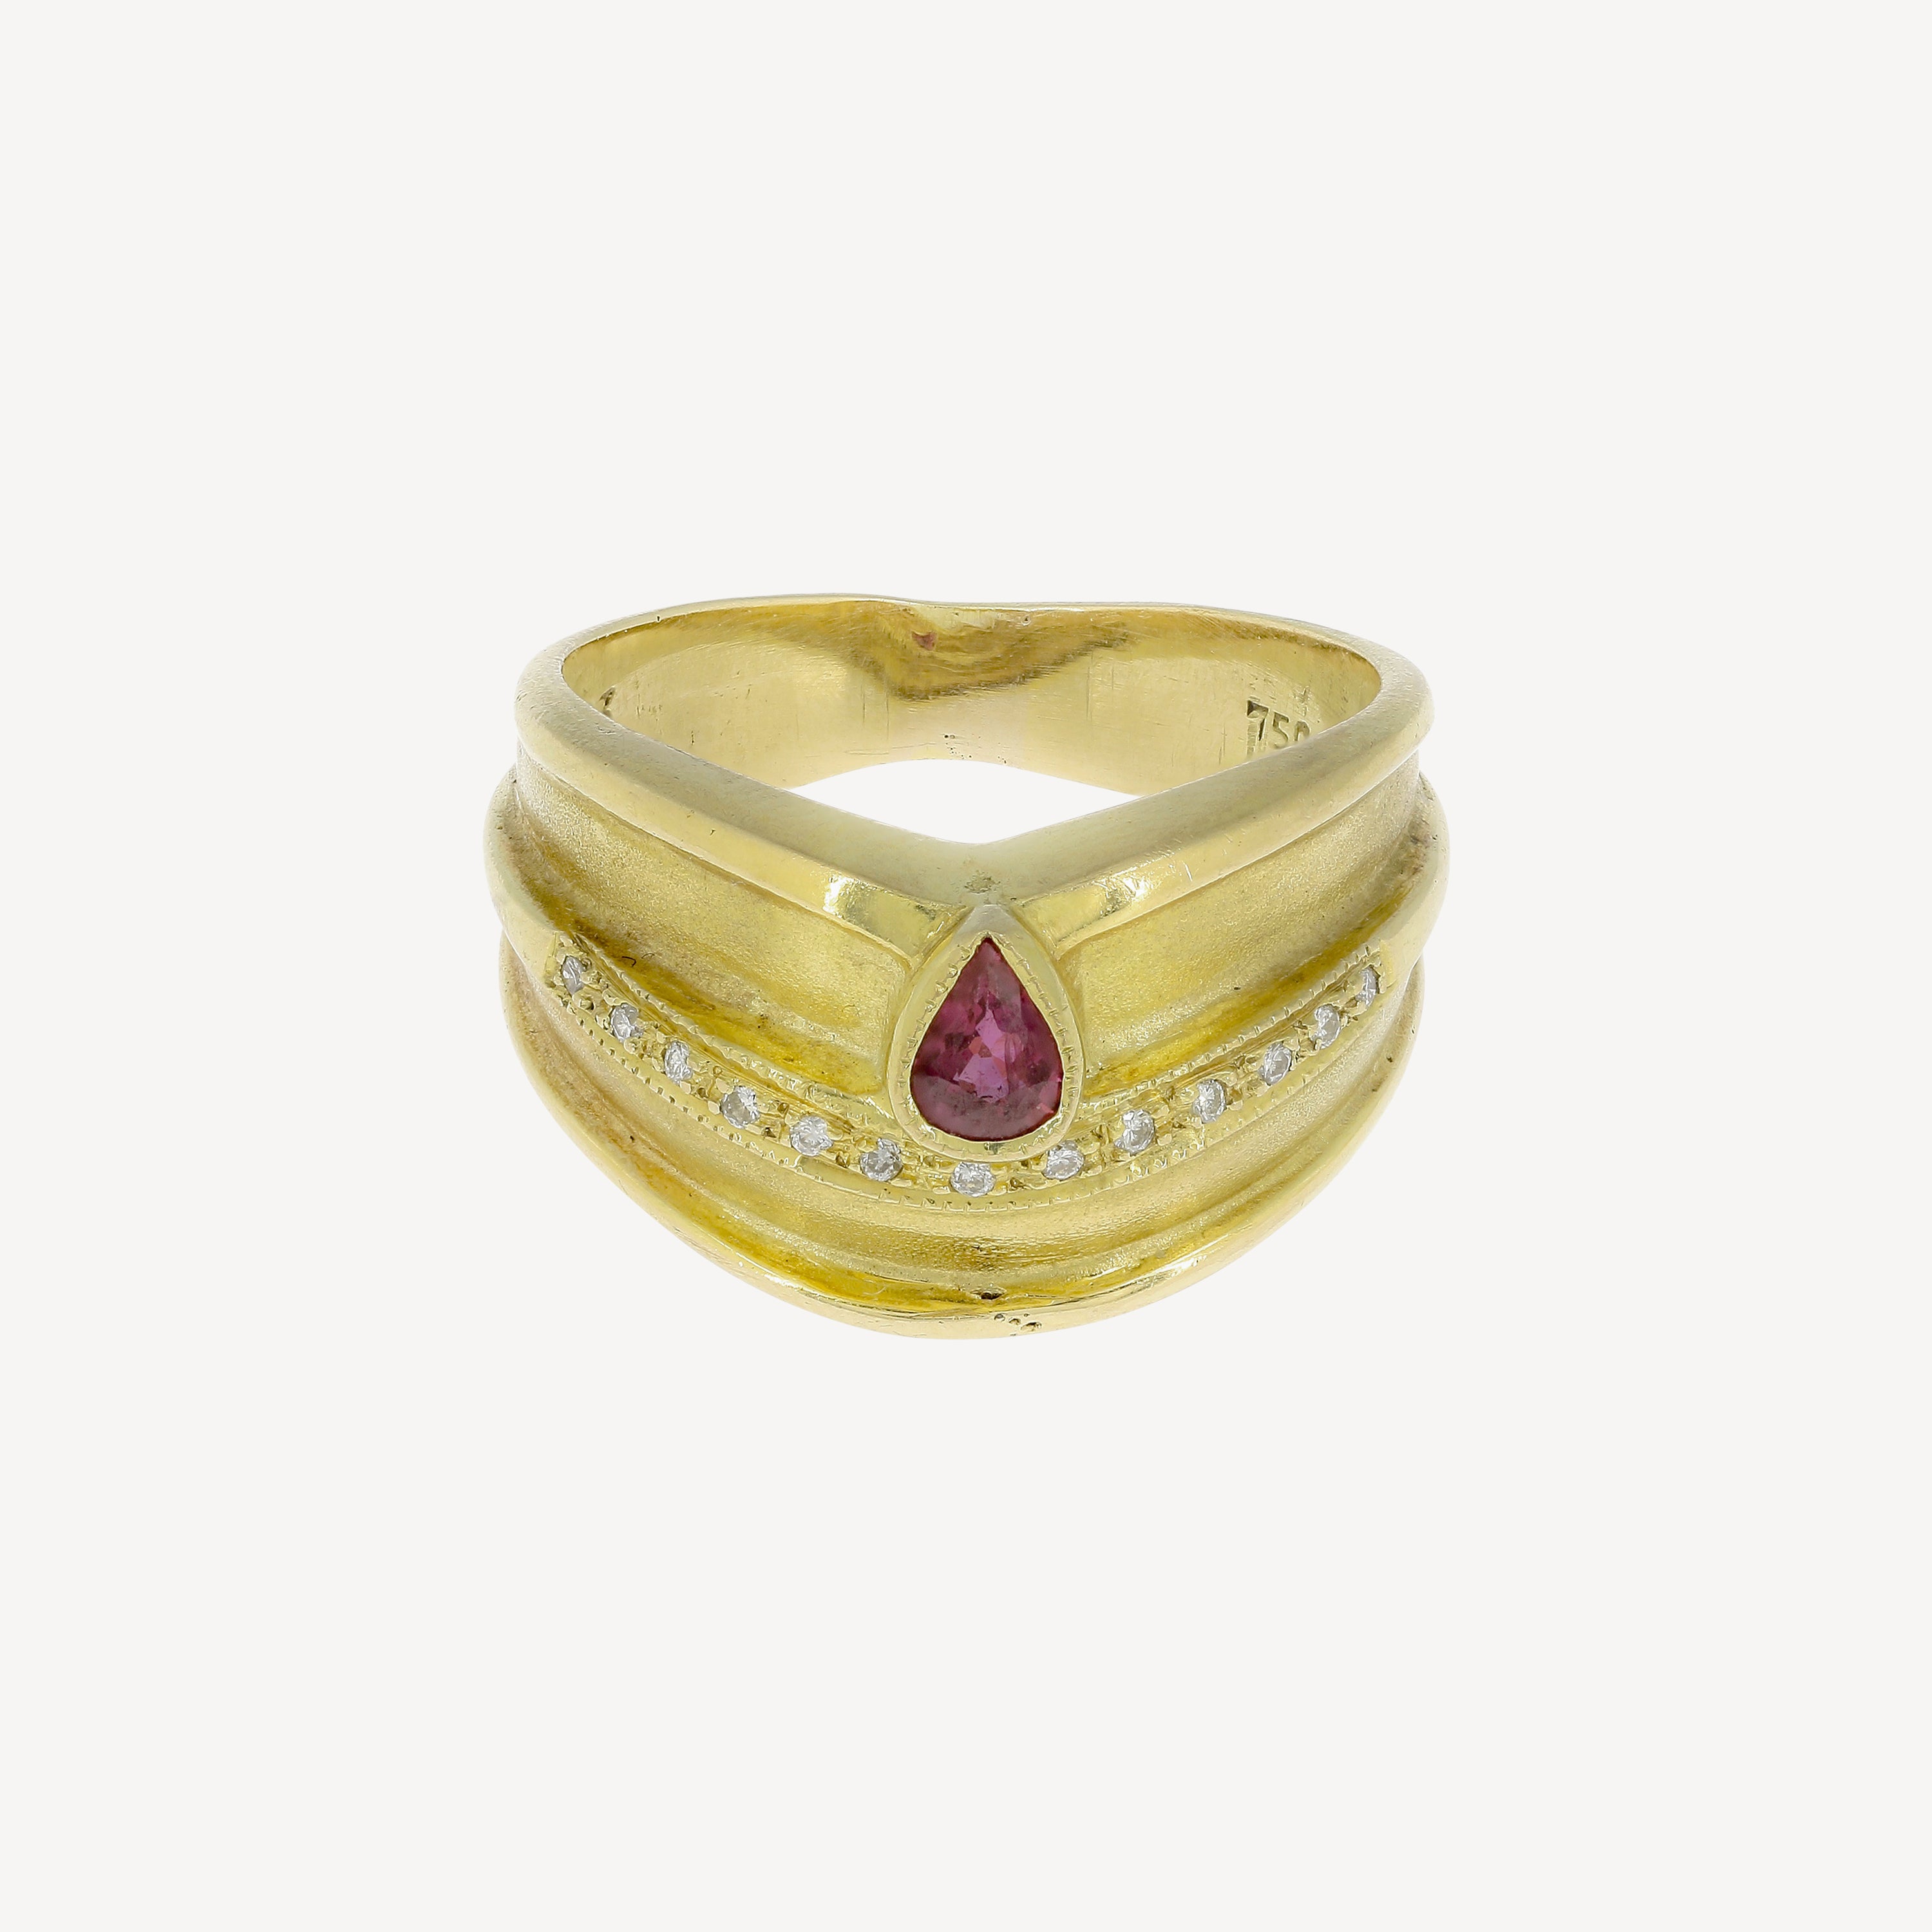 Vintage Ruby and Diamond Ring in Yellow Gold